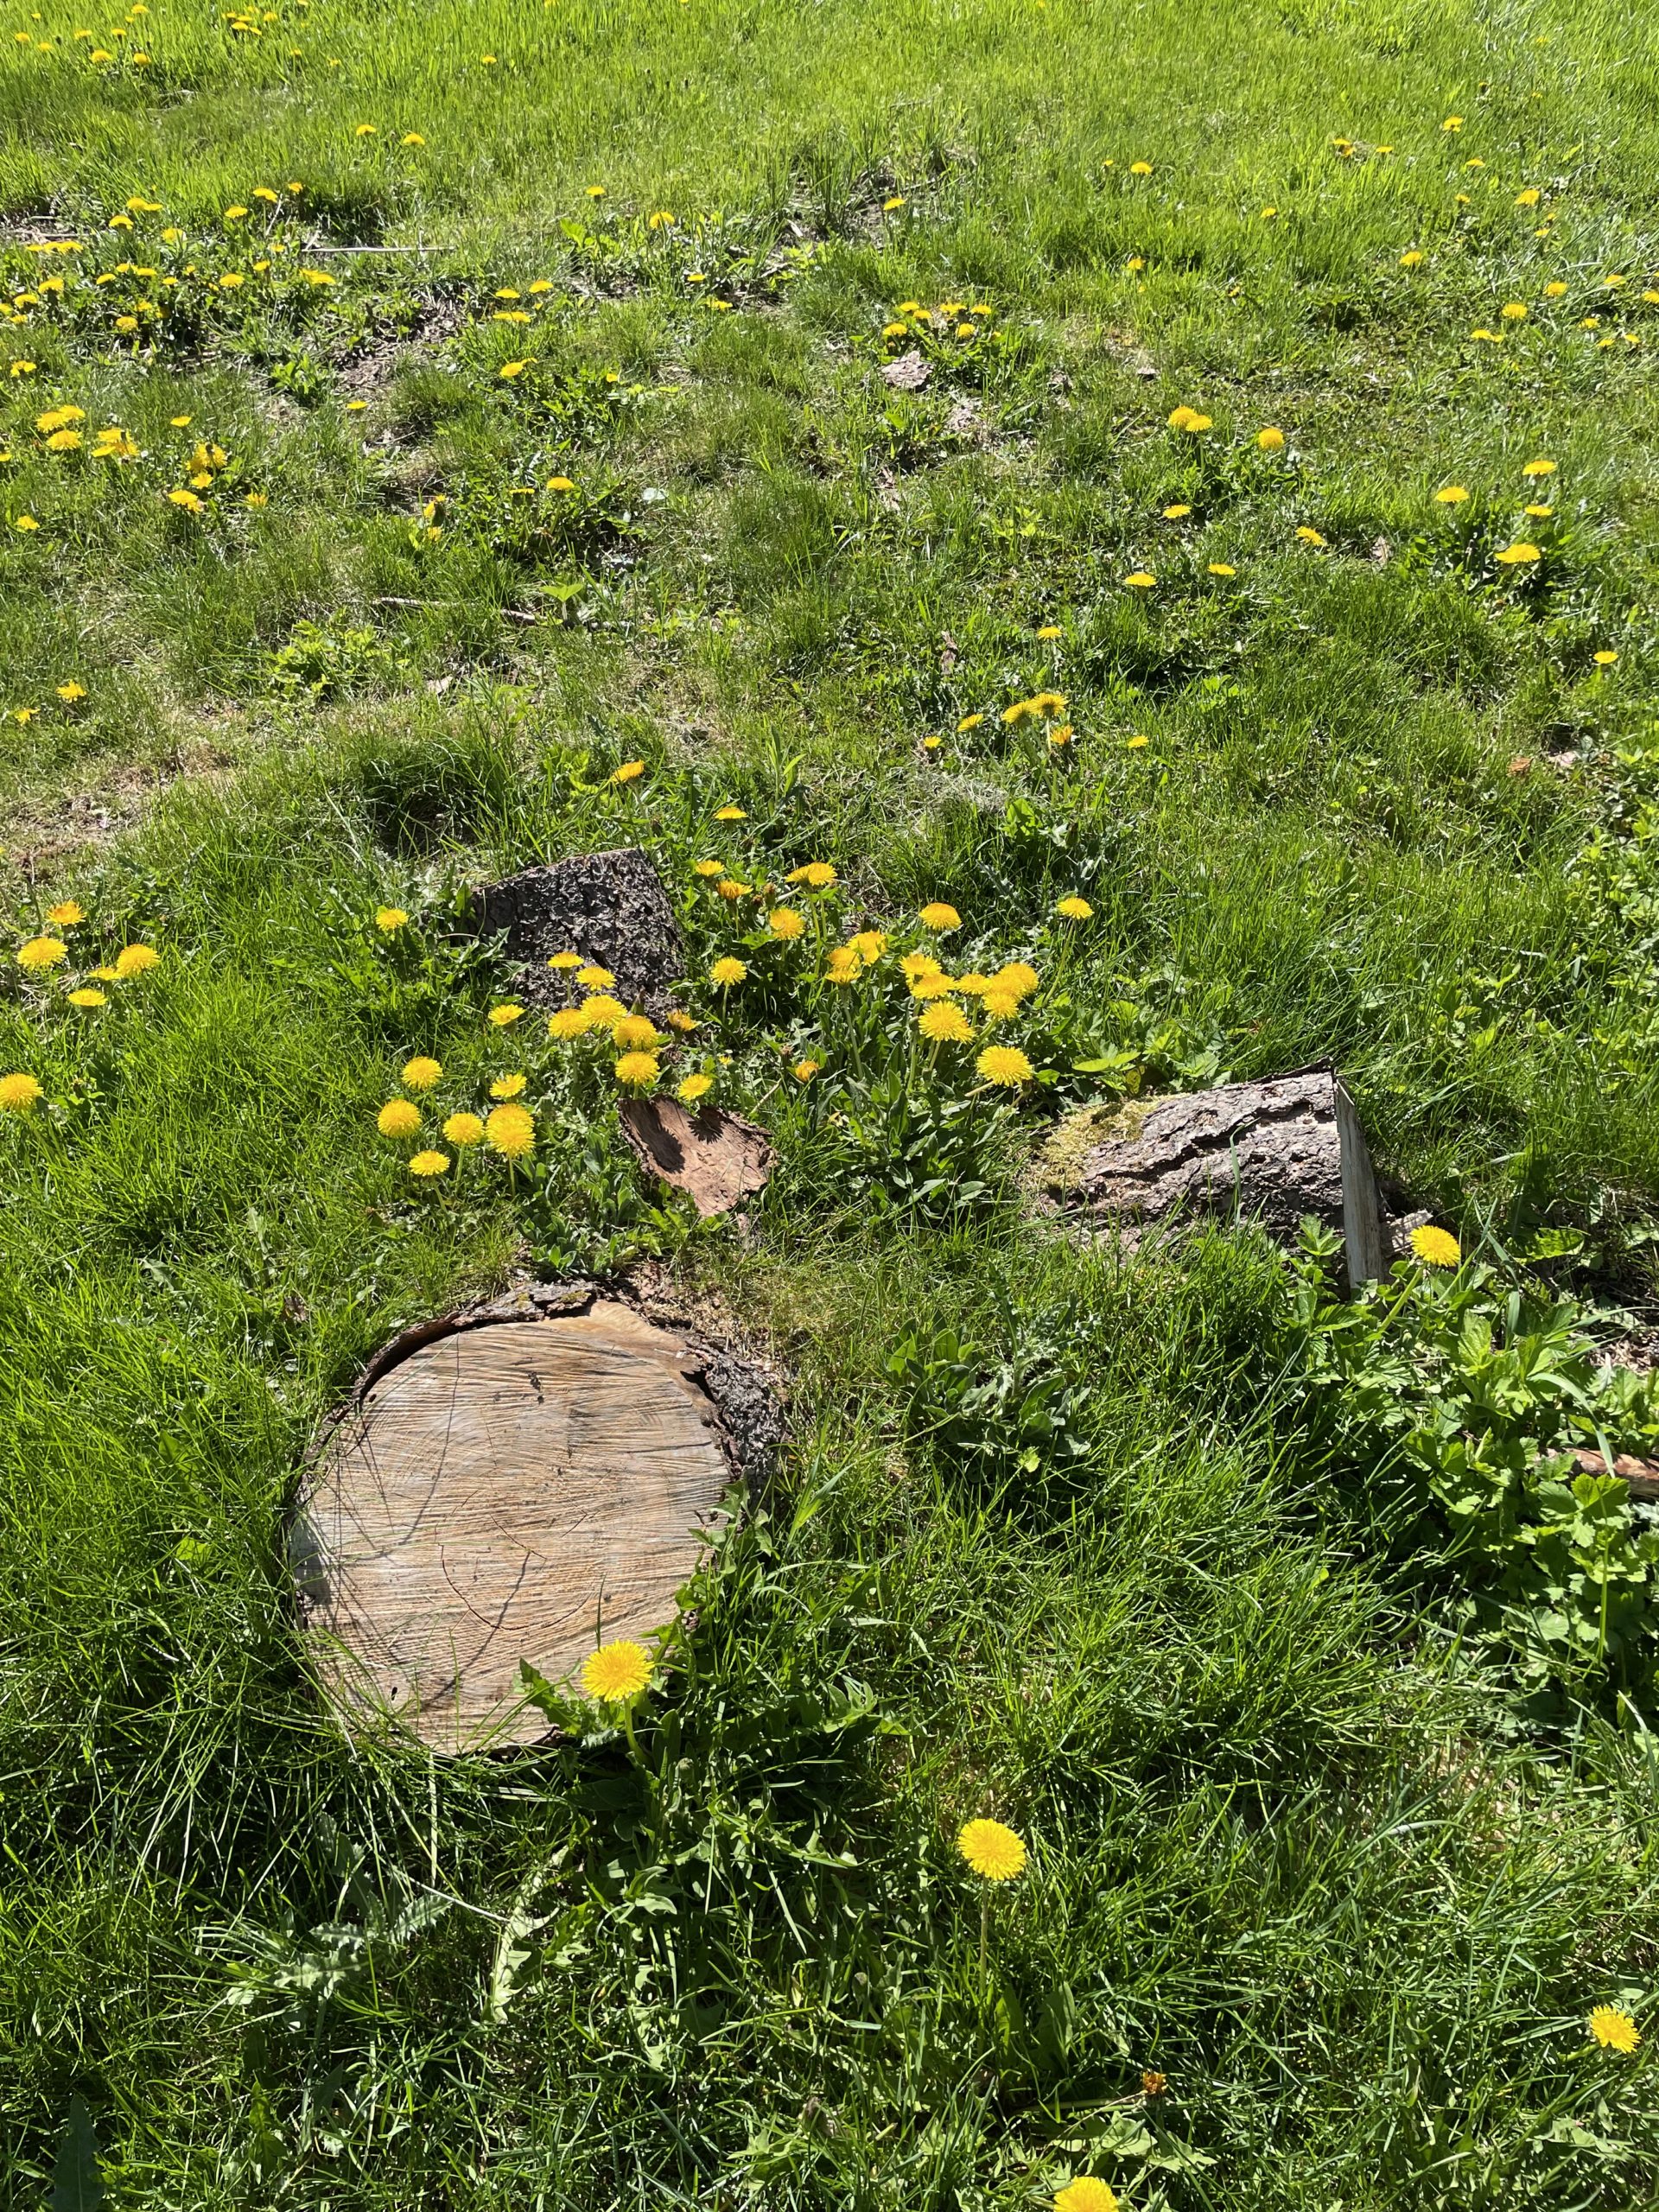 colour photo of s tree stumps with dandelions blooming nearby